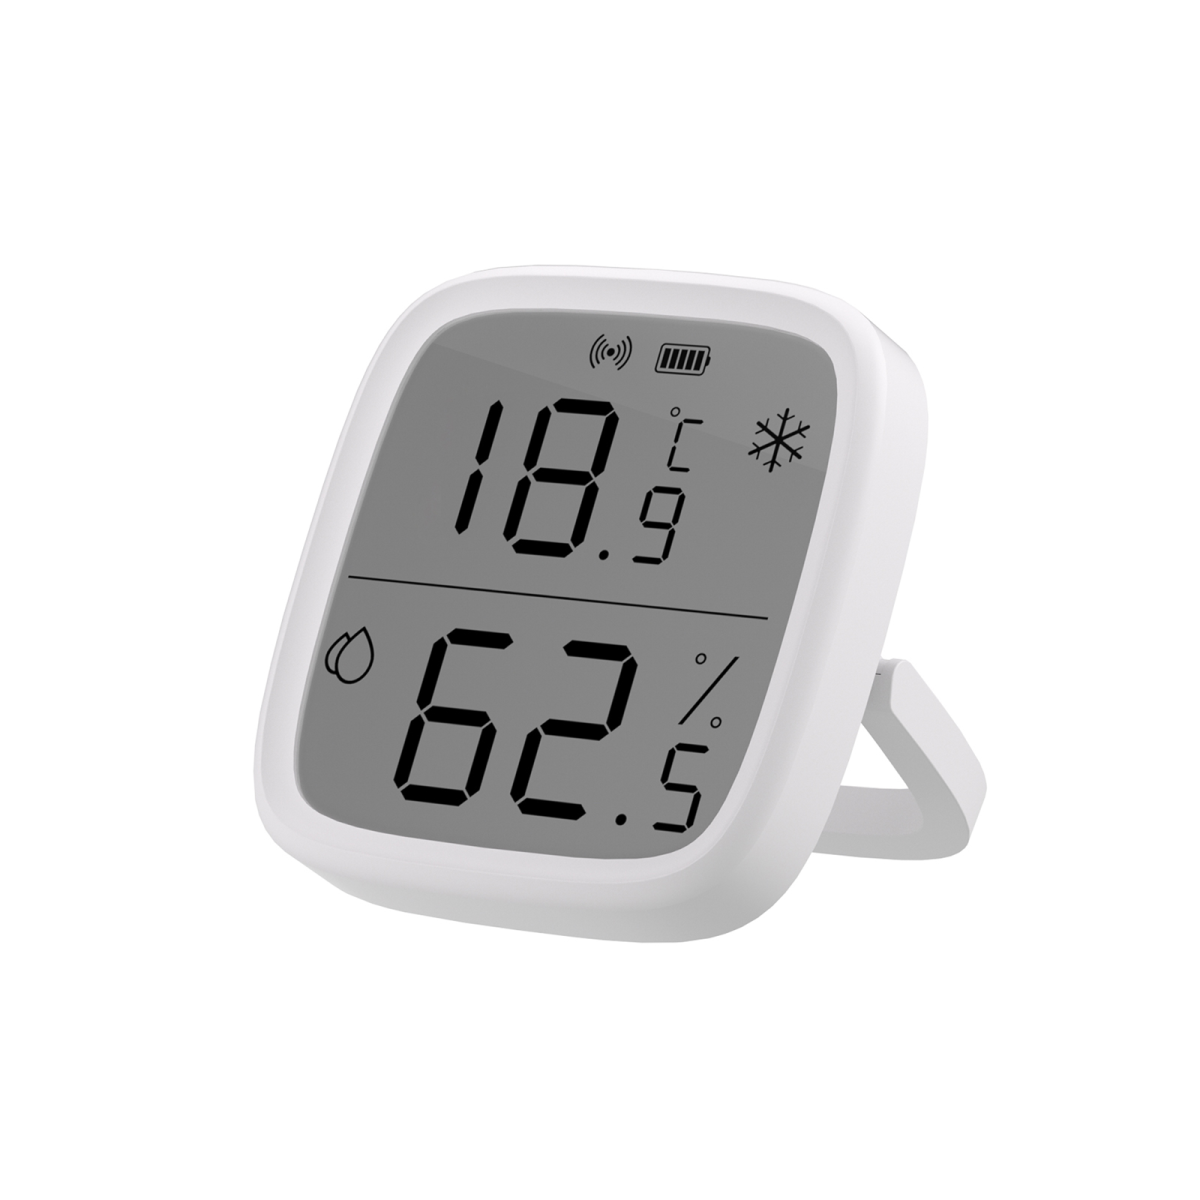 Cheap Zigbee Temperature Humidity Monitor Smart Temperature and Humidity  Sensor with LCD Screen Indoor